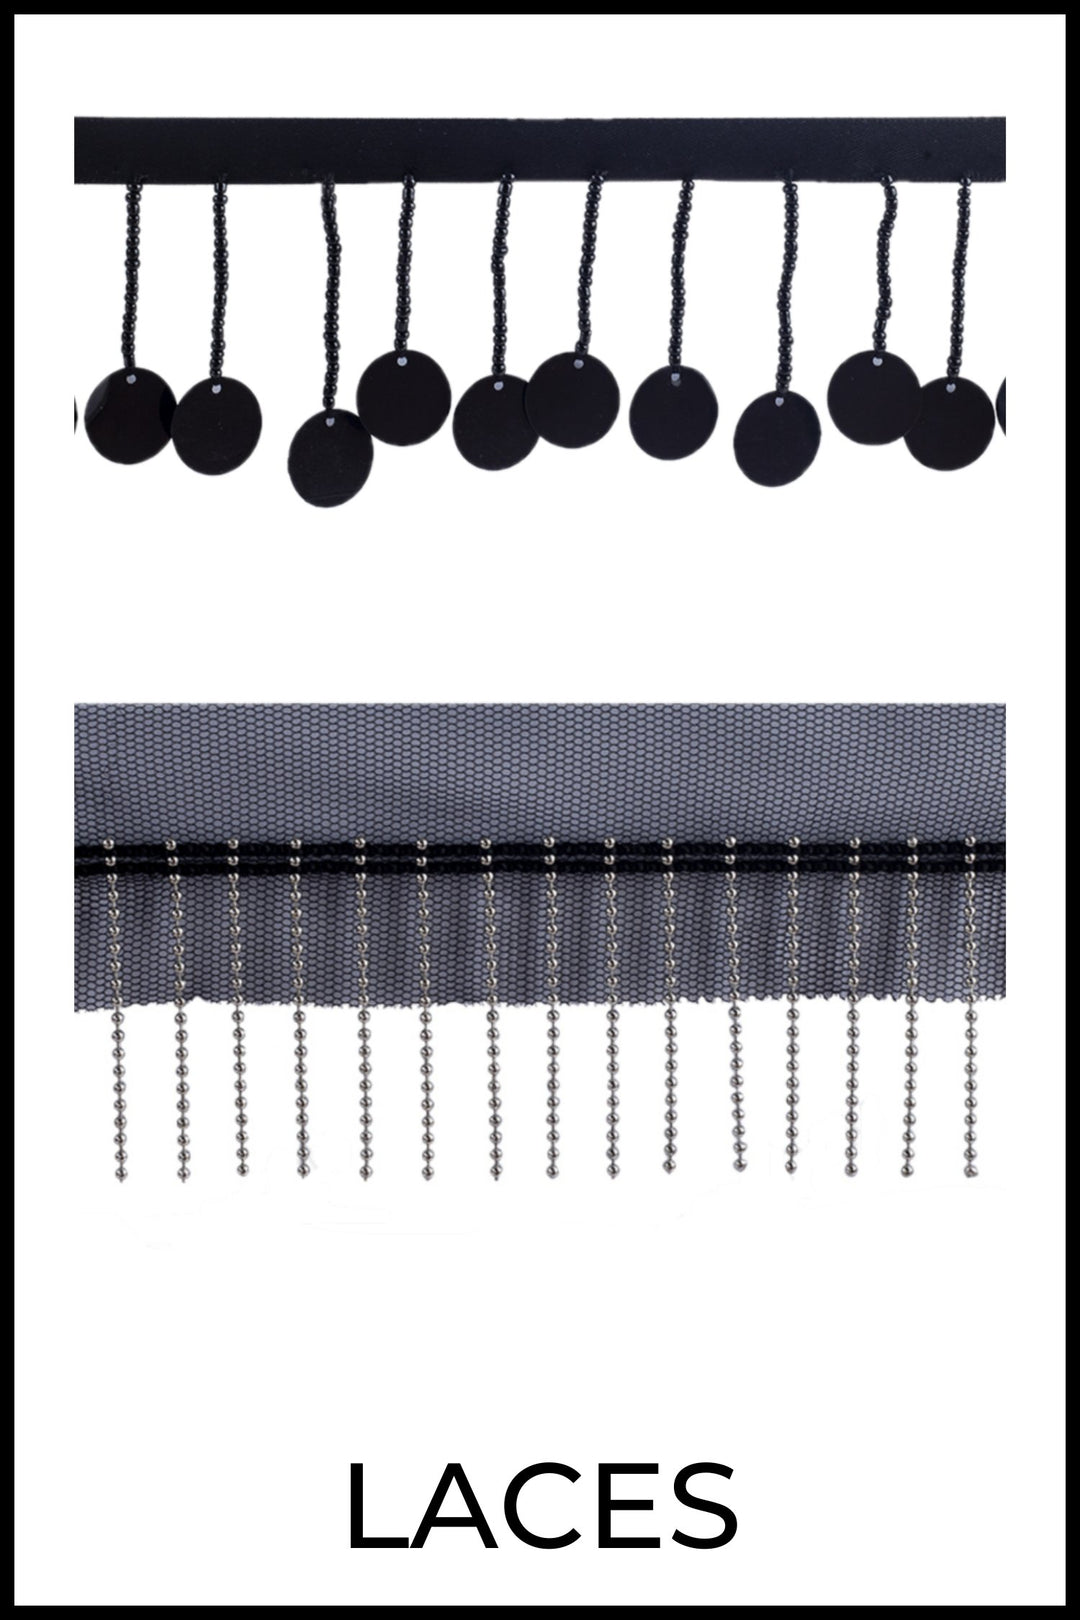 Laces and borders are of good quality and are finished with fineness. Sew on laces and trims embellished with beads and sequins and tassels to add a finishing touch to any clothing.